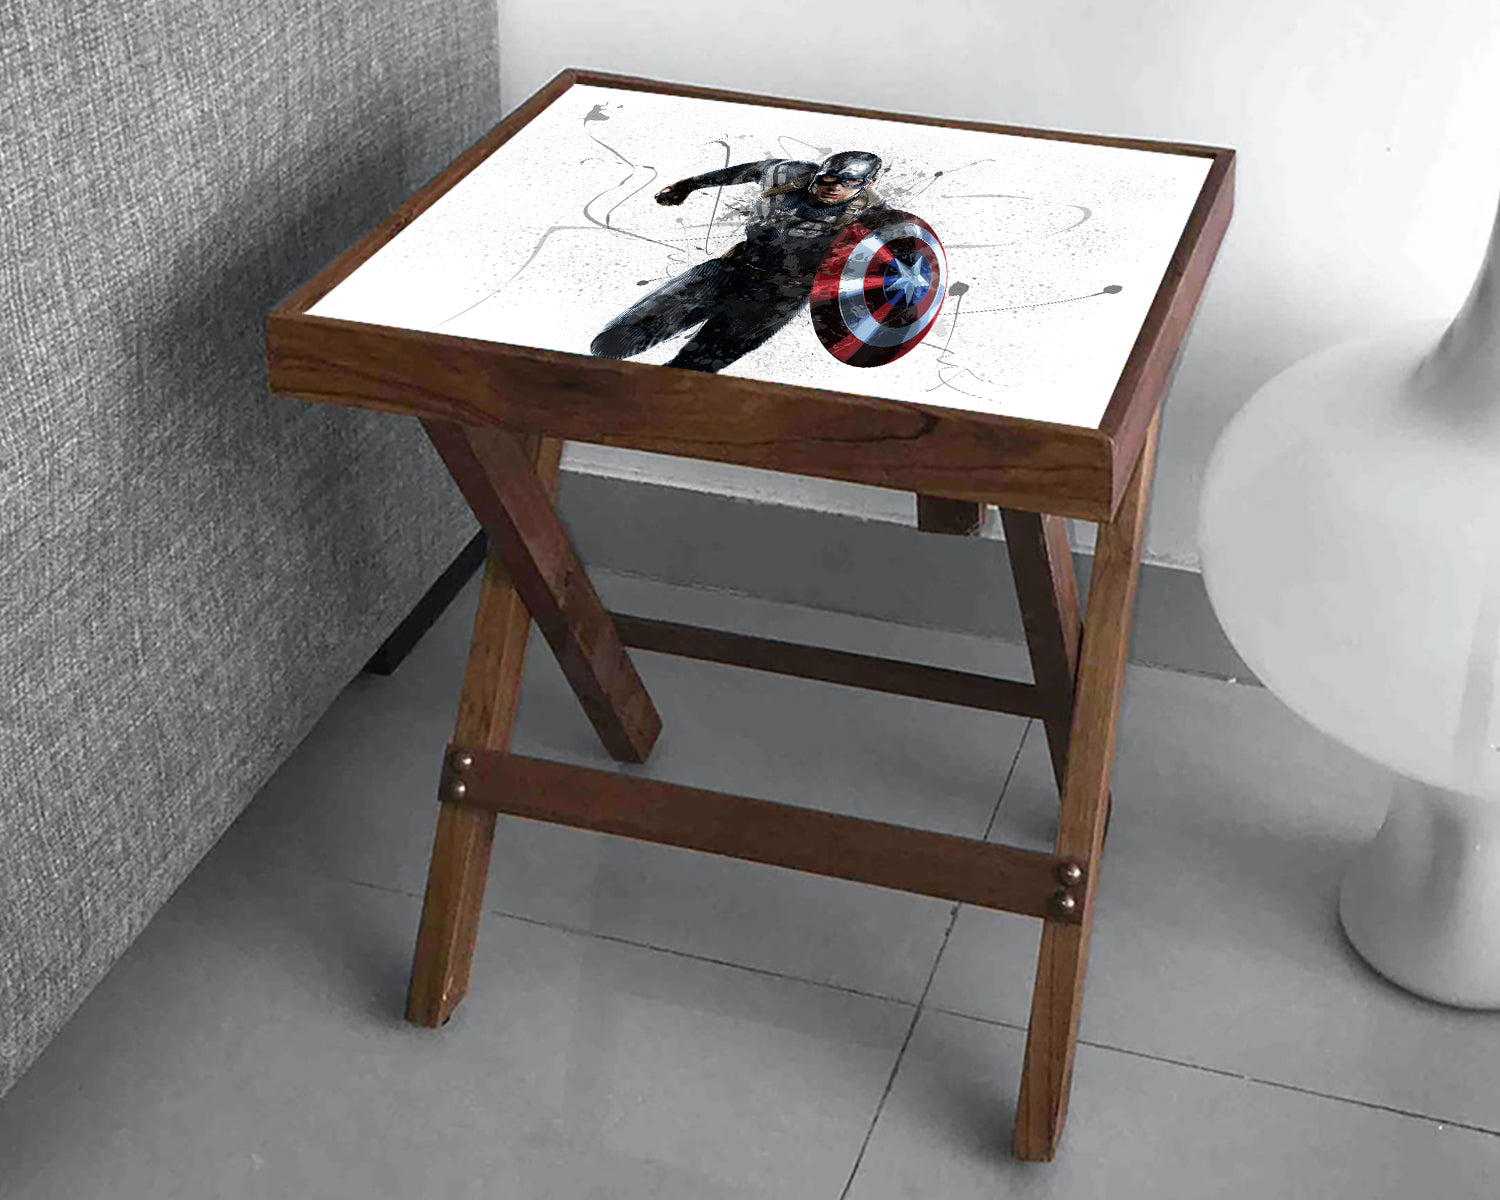 Captain America Splash Effect Coffee and Laptop Table 